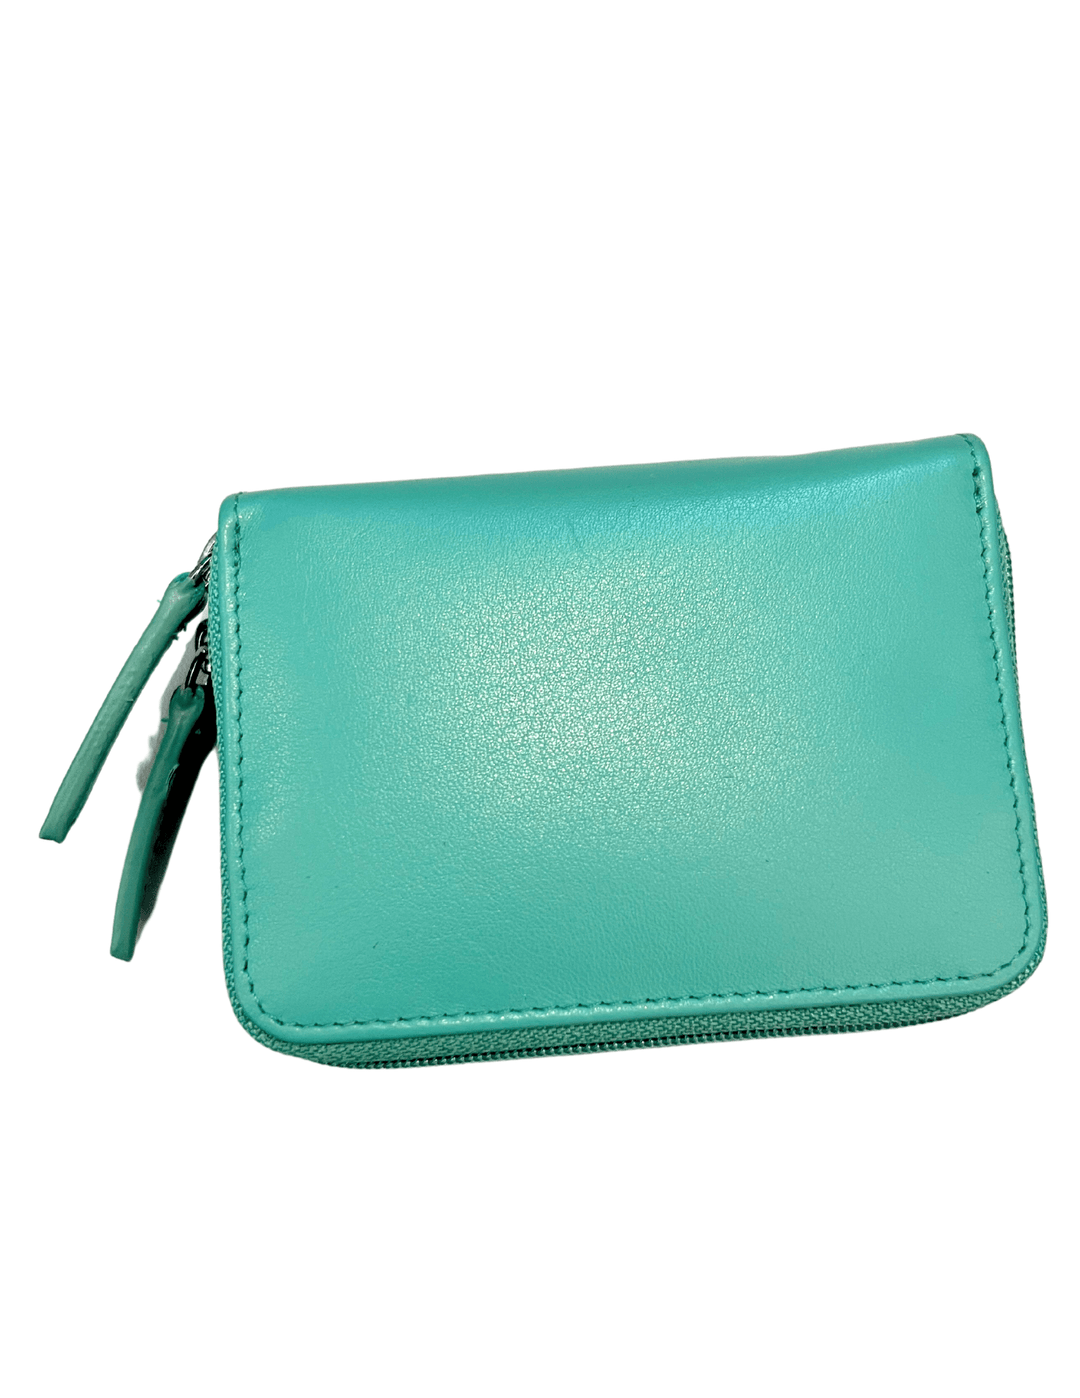 tres chic boutique womens gift store colorful leather goods